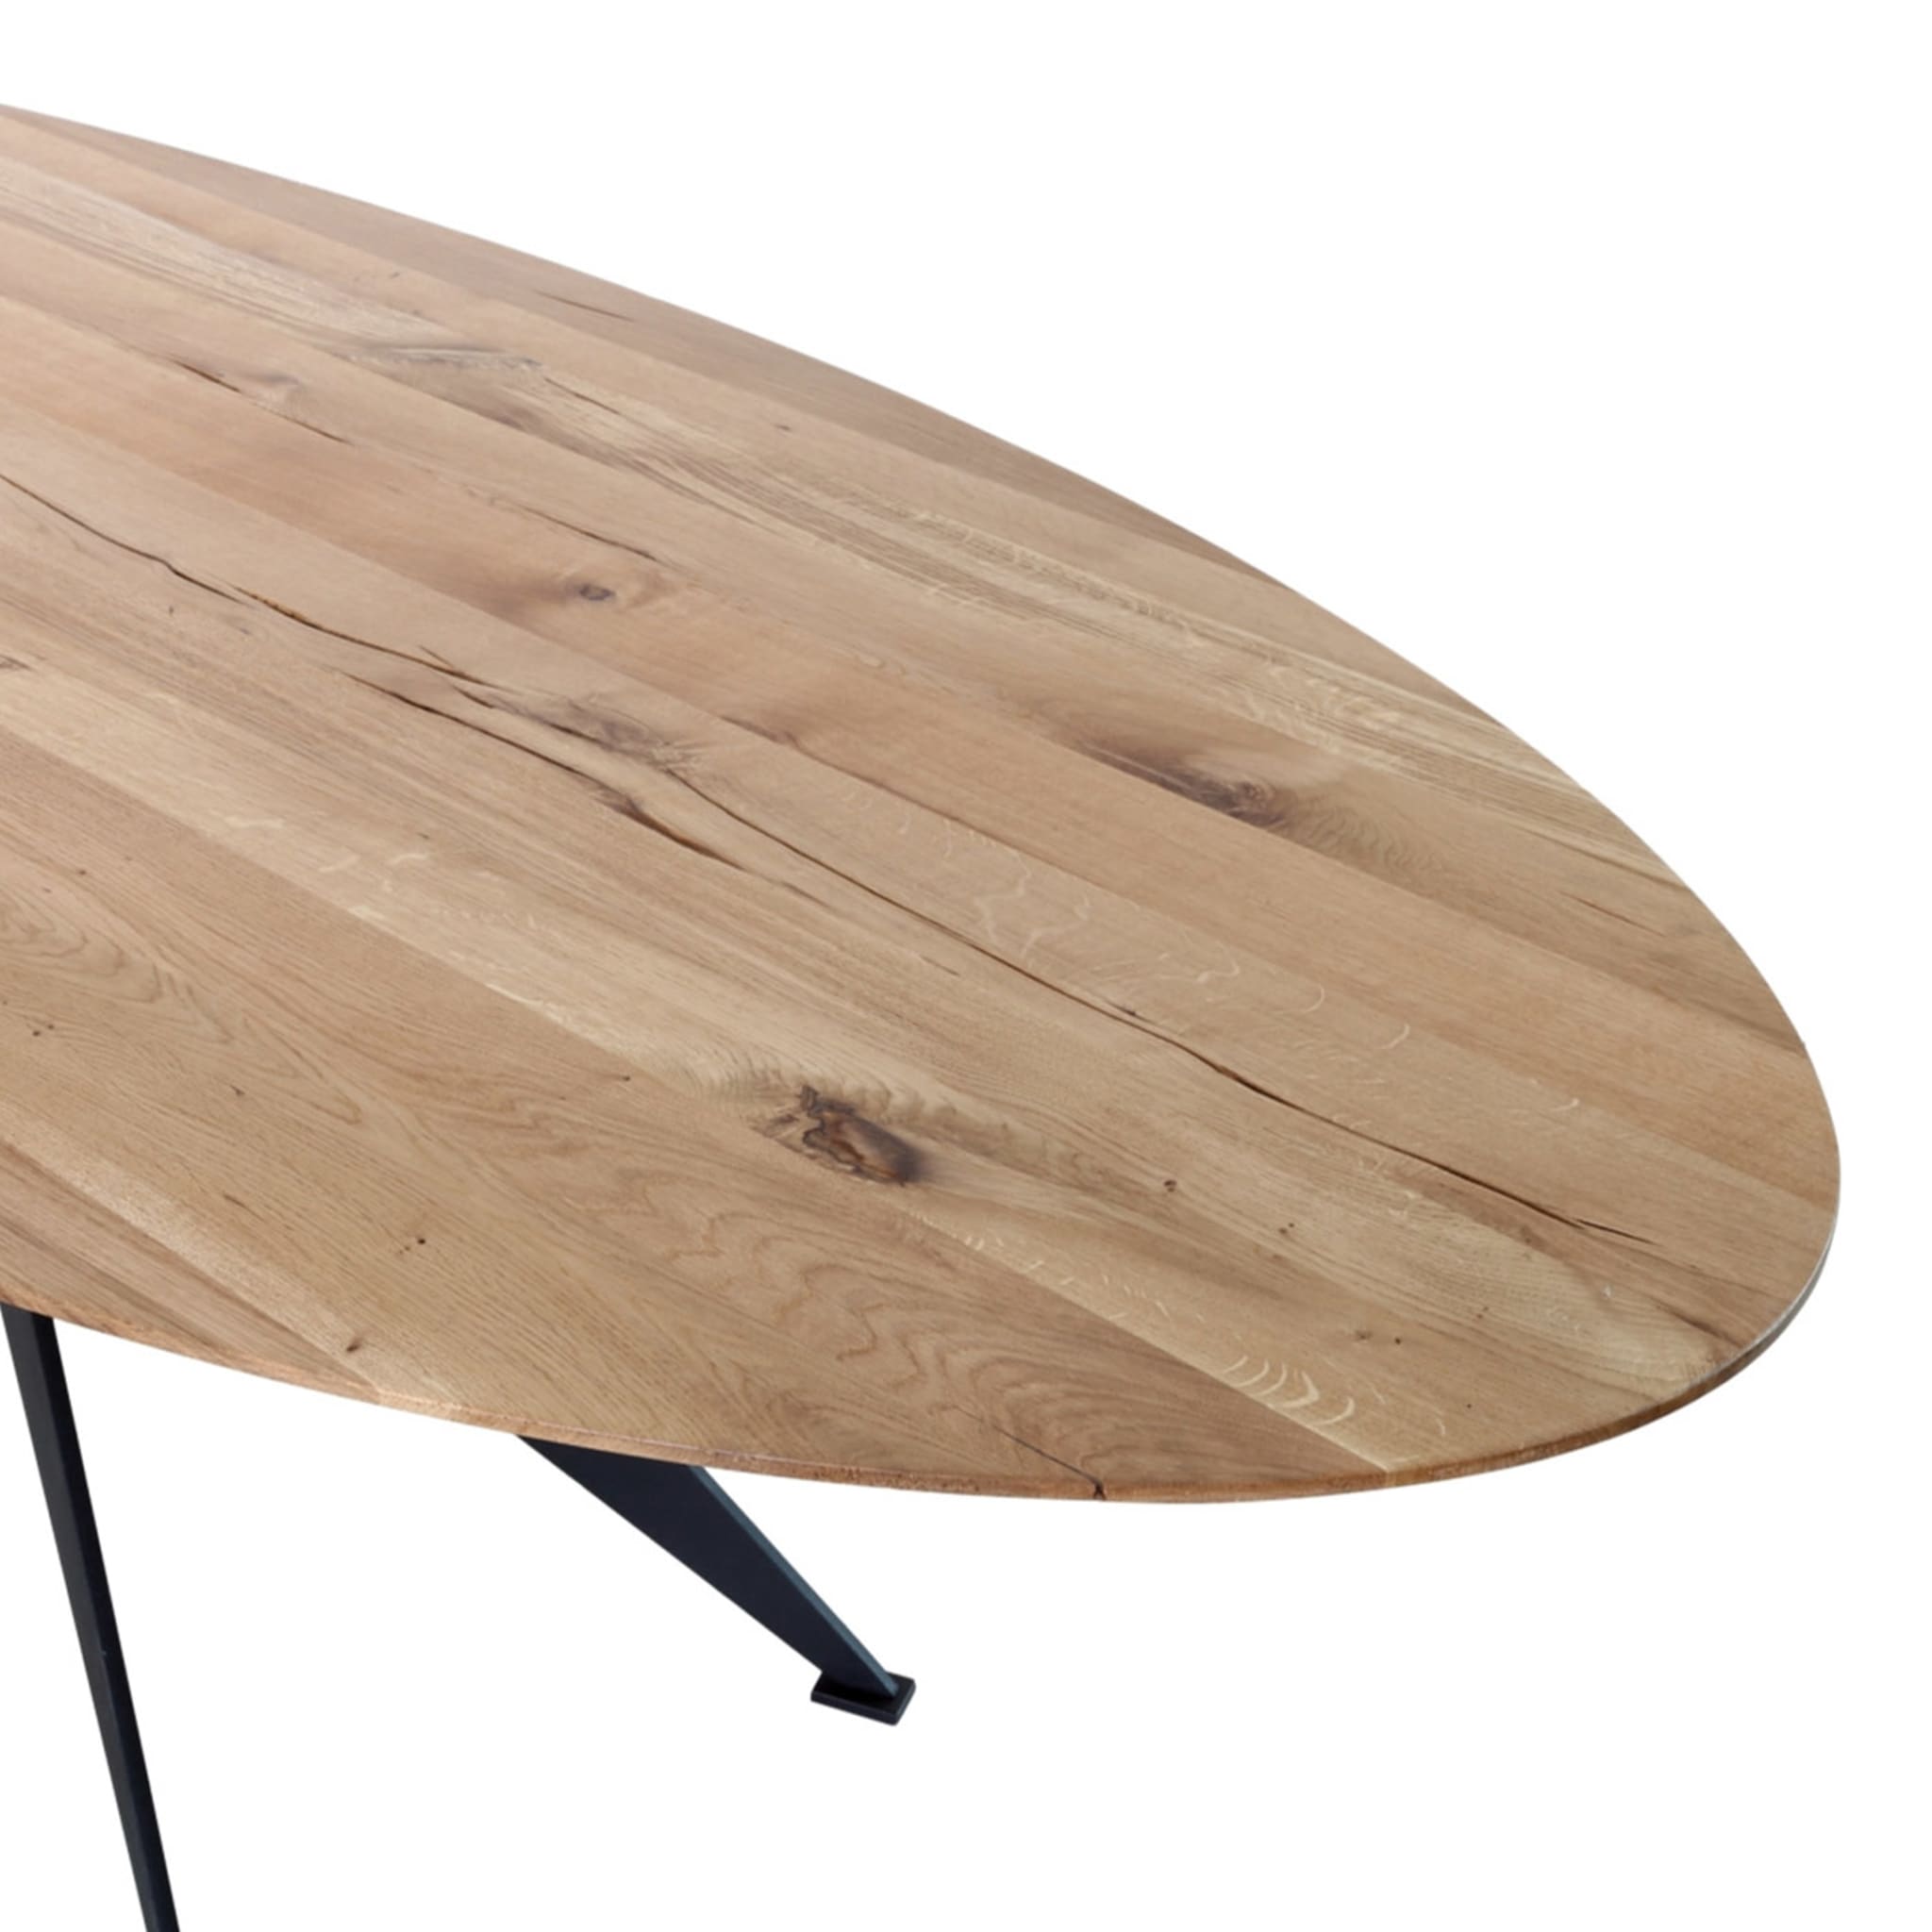 Durmast Oval Dining Table - Alternative view 1